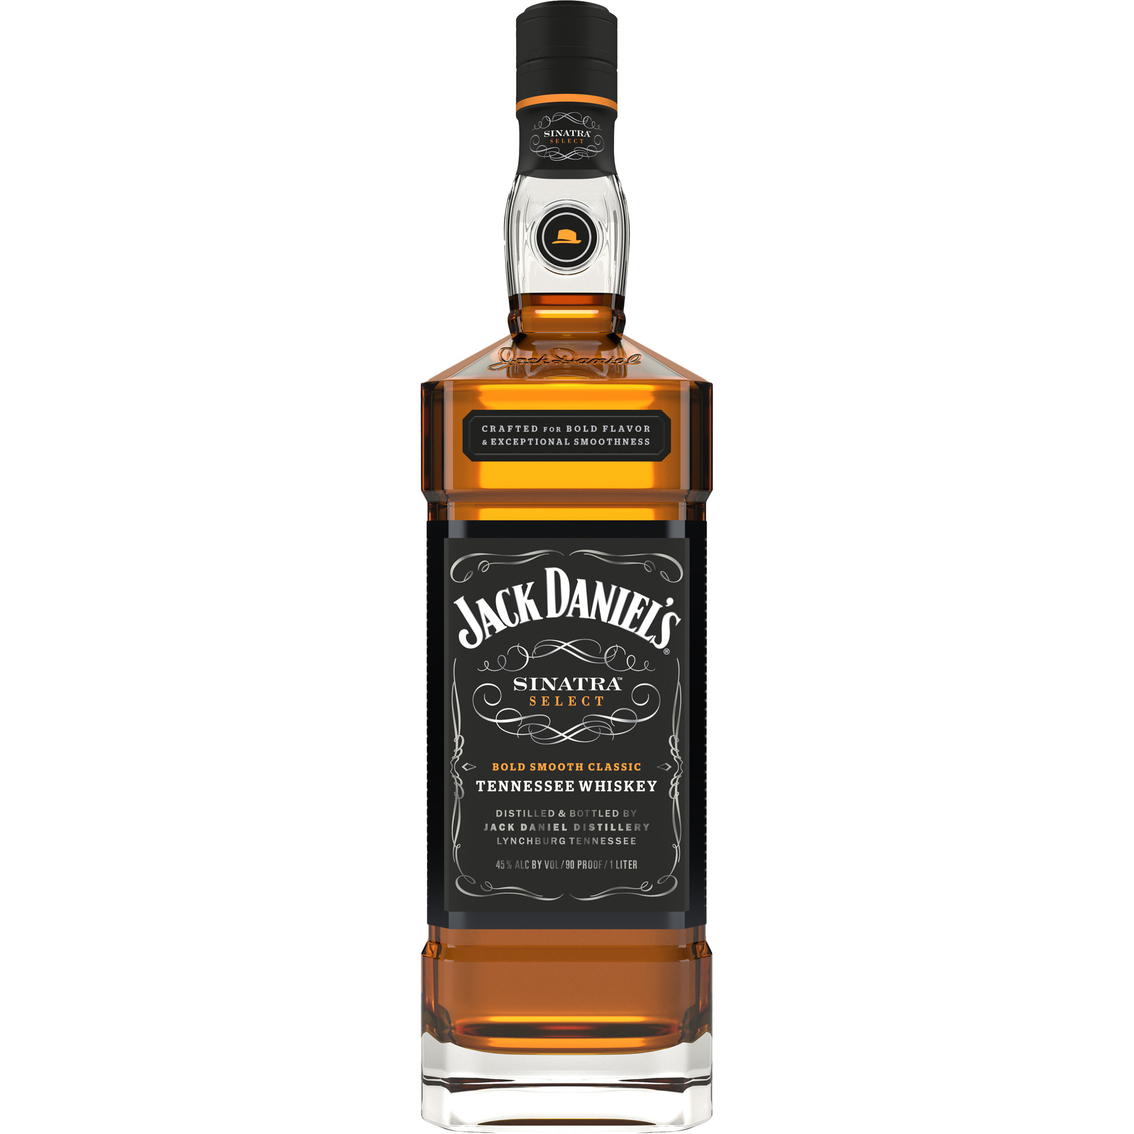 Jack Daniels Sinatra Select Tennessee Whiskey 1L - Image 1 of 2